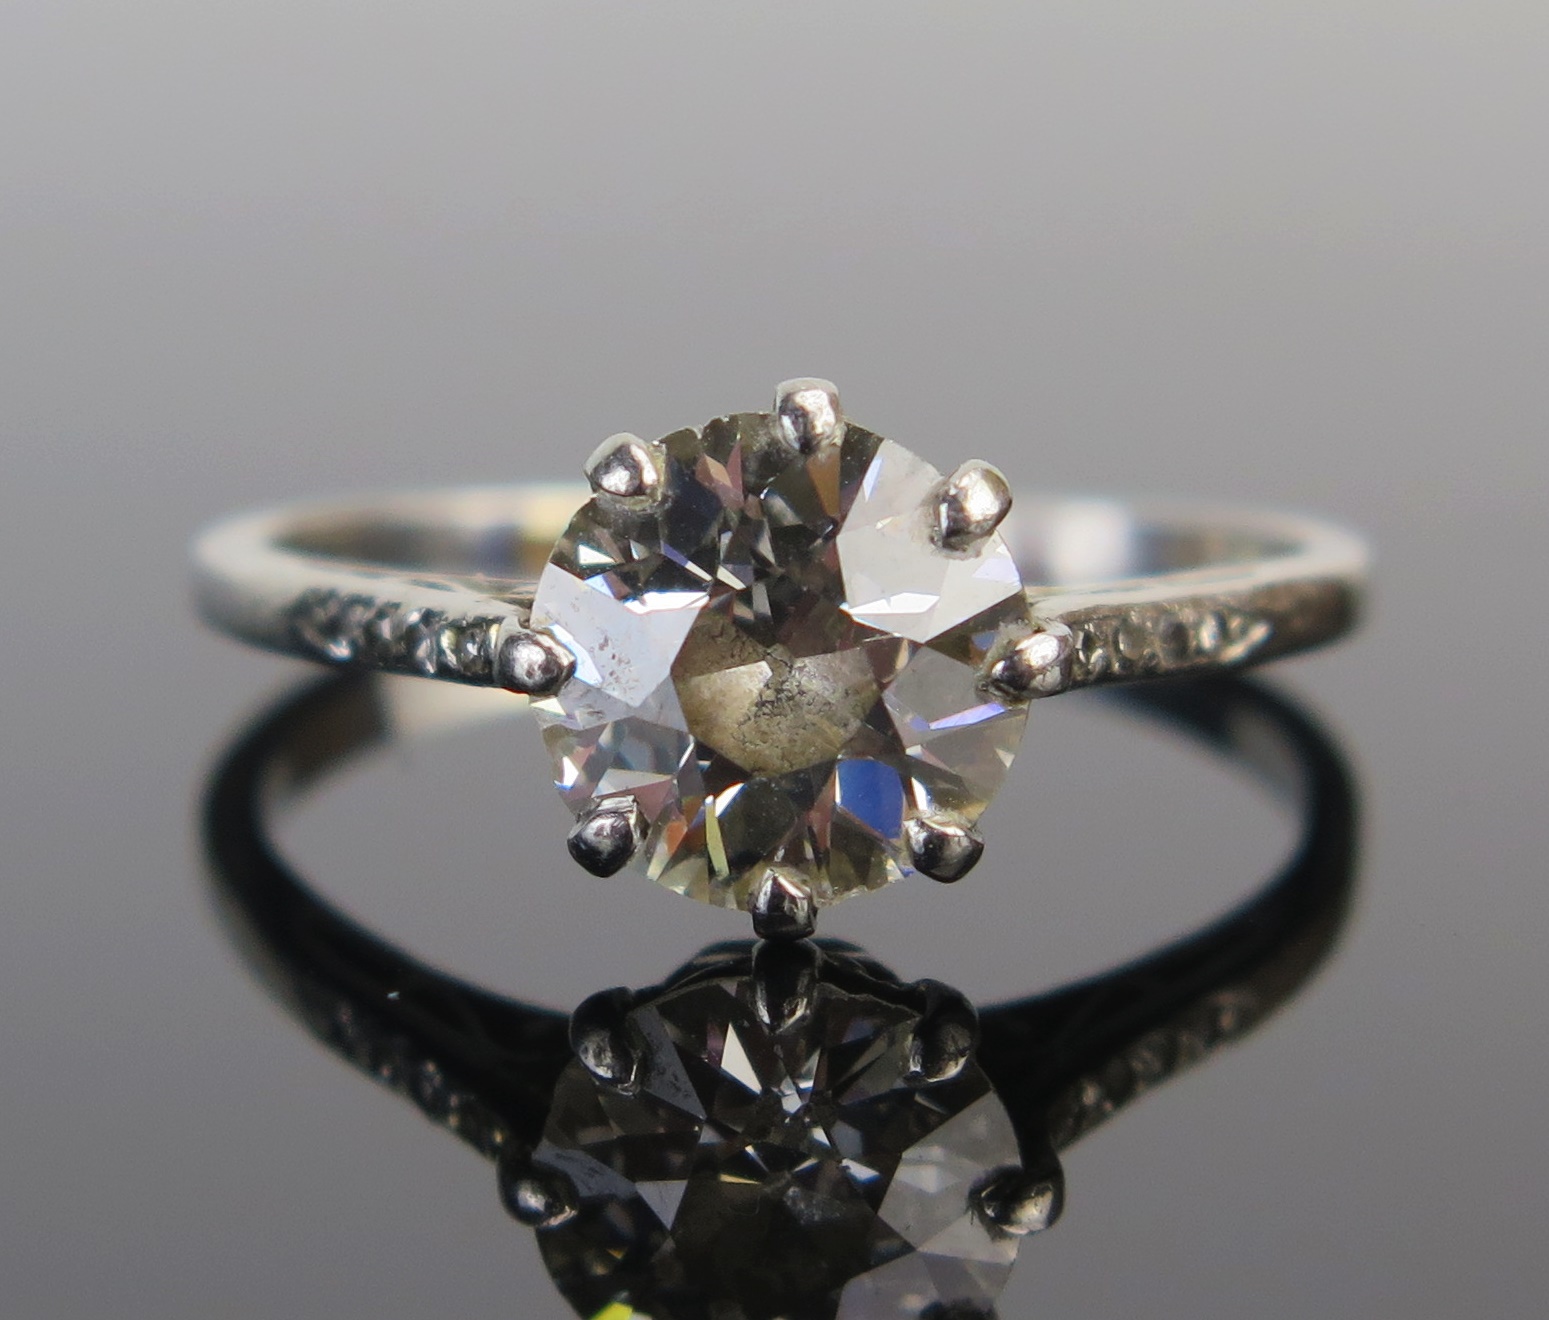 A Diamond Solitaire Ring in a precious white metal setting, the c. 8.1mm old European cut stone in a